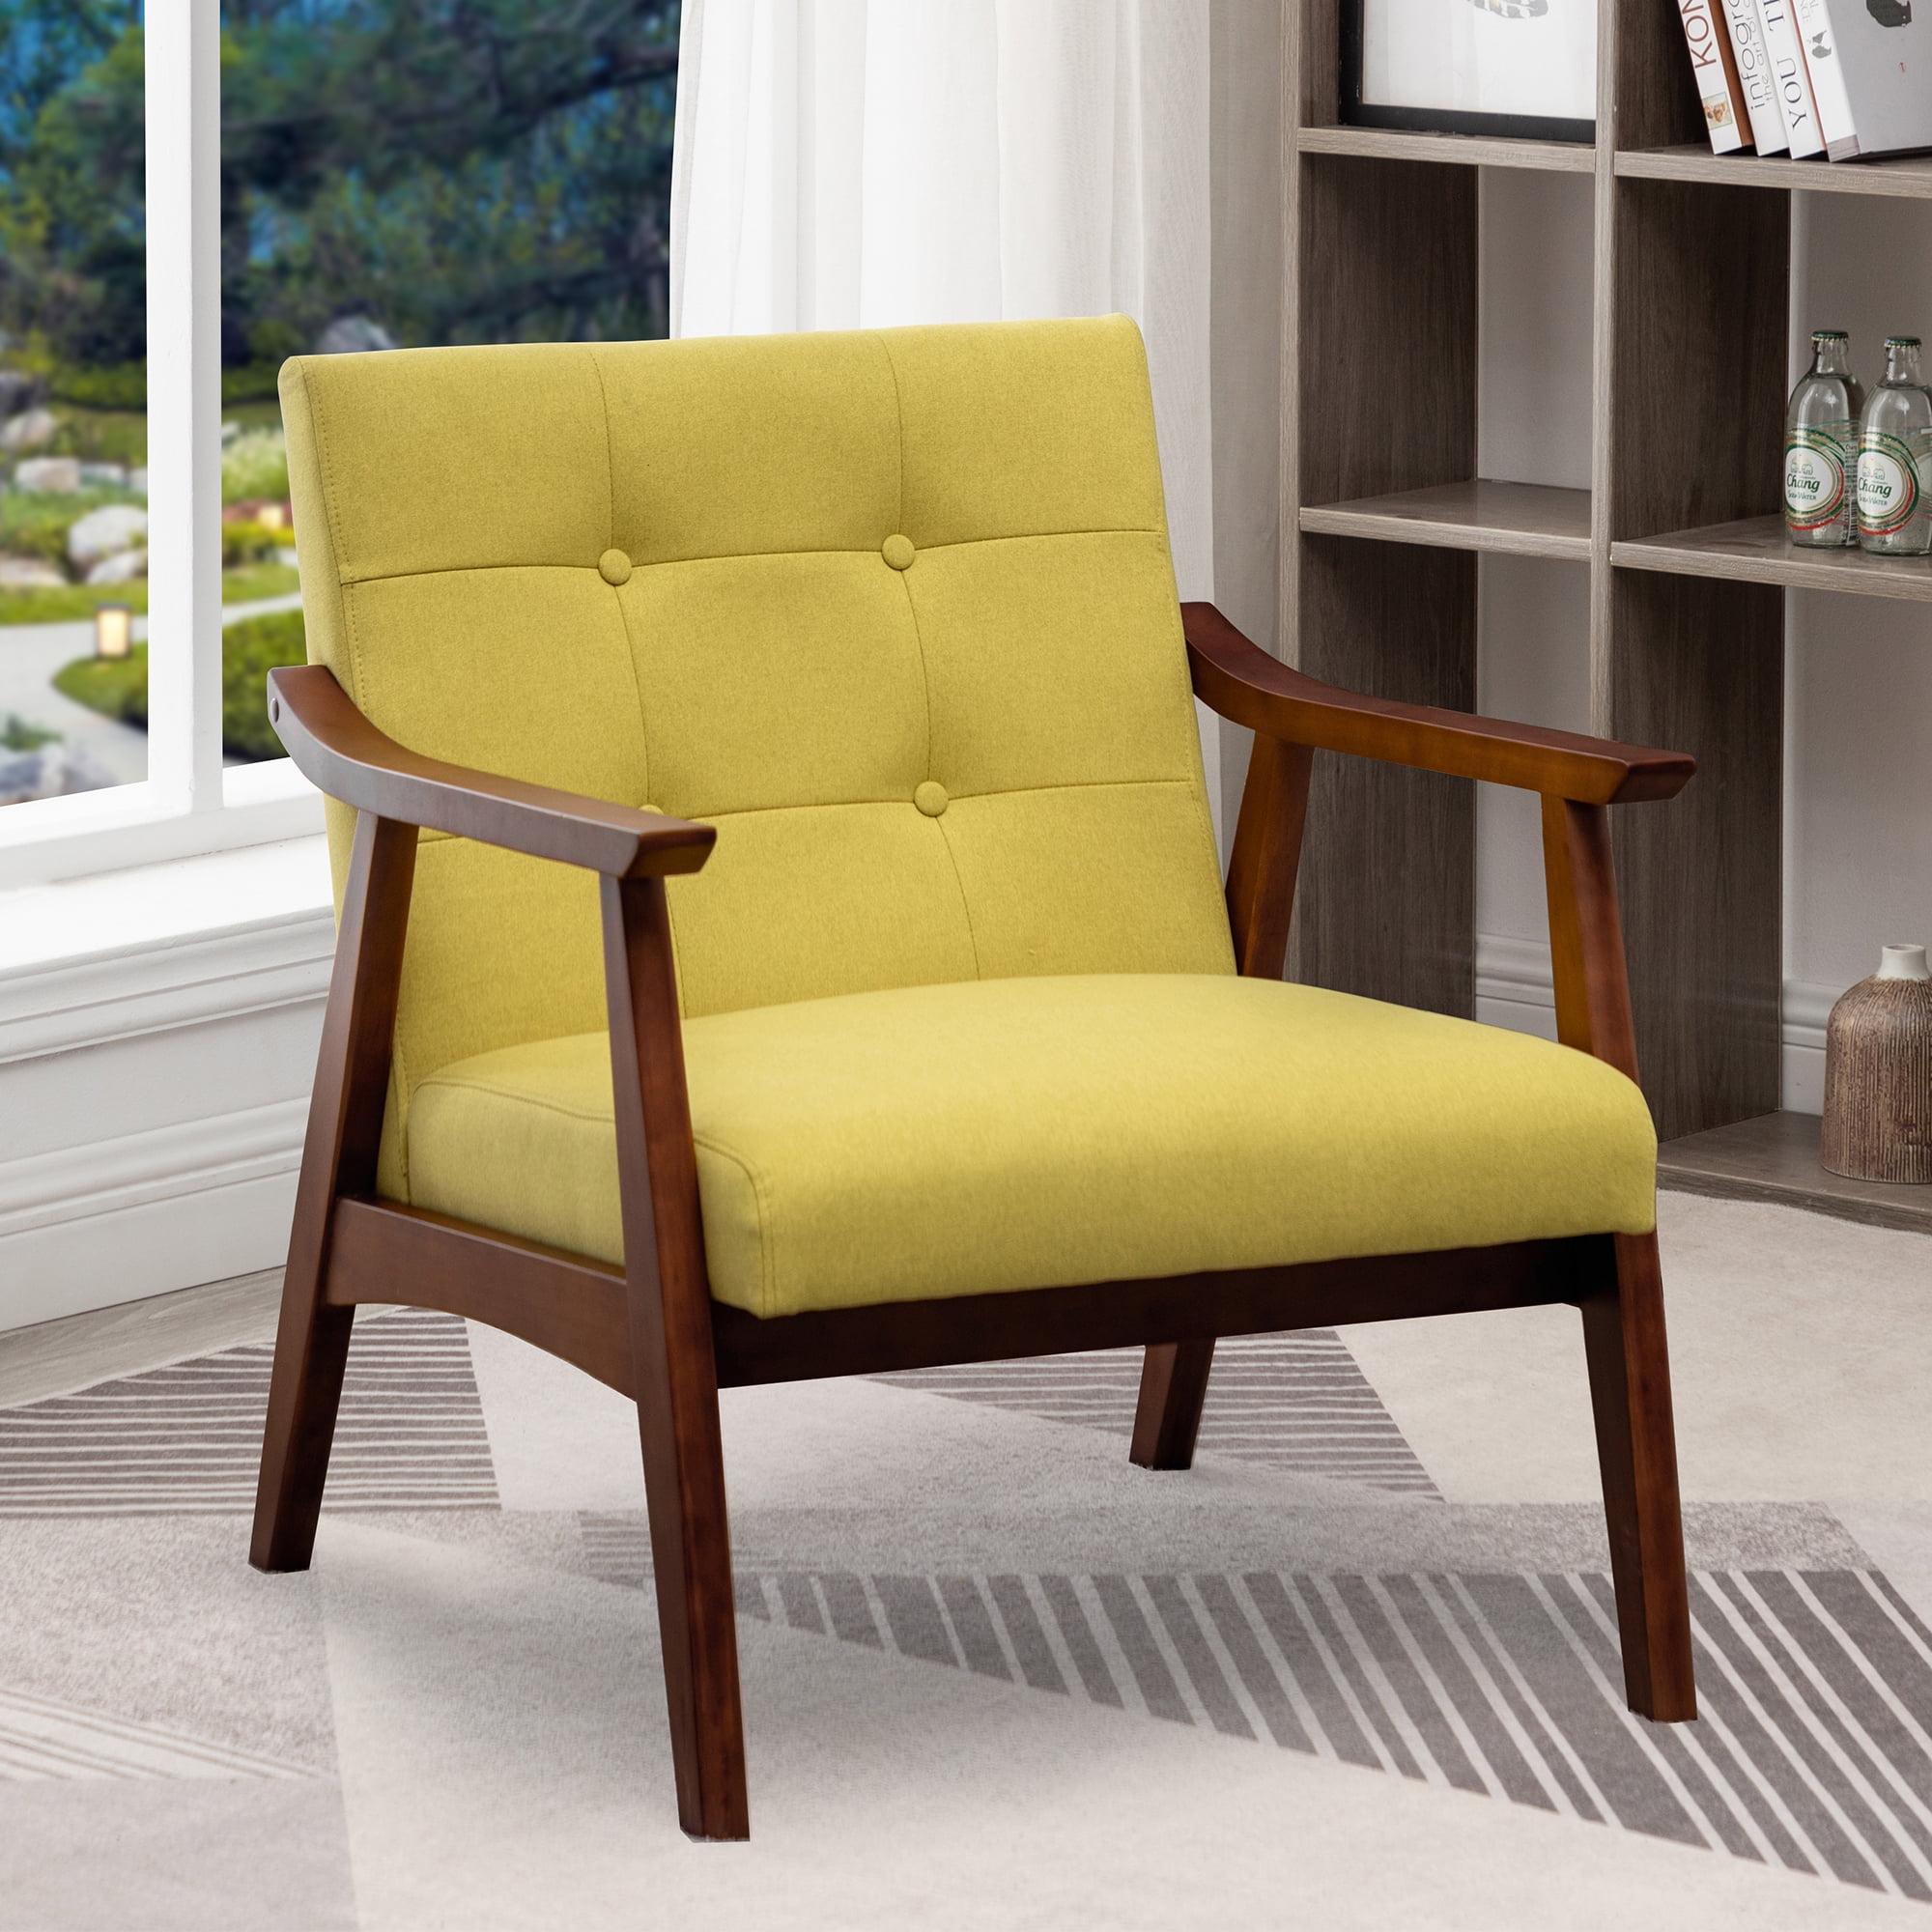 Bumblebee Yellow Faux Leather Accent Chair with Espresso Wood Frame